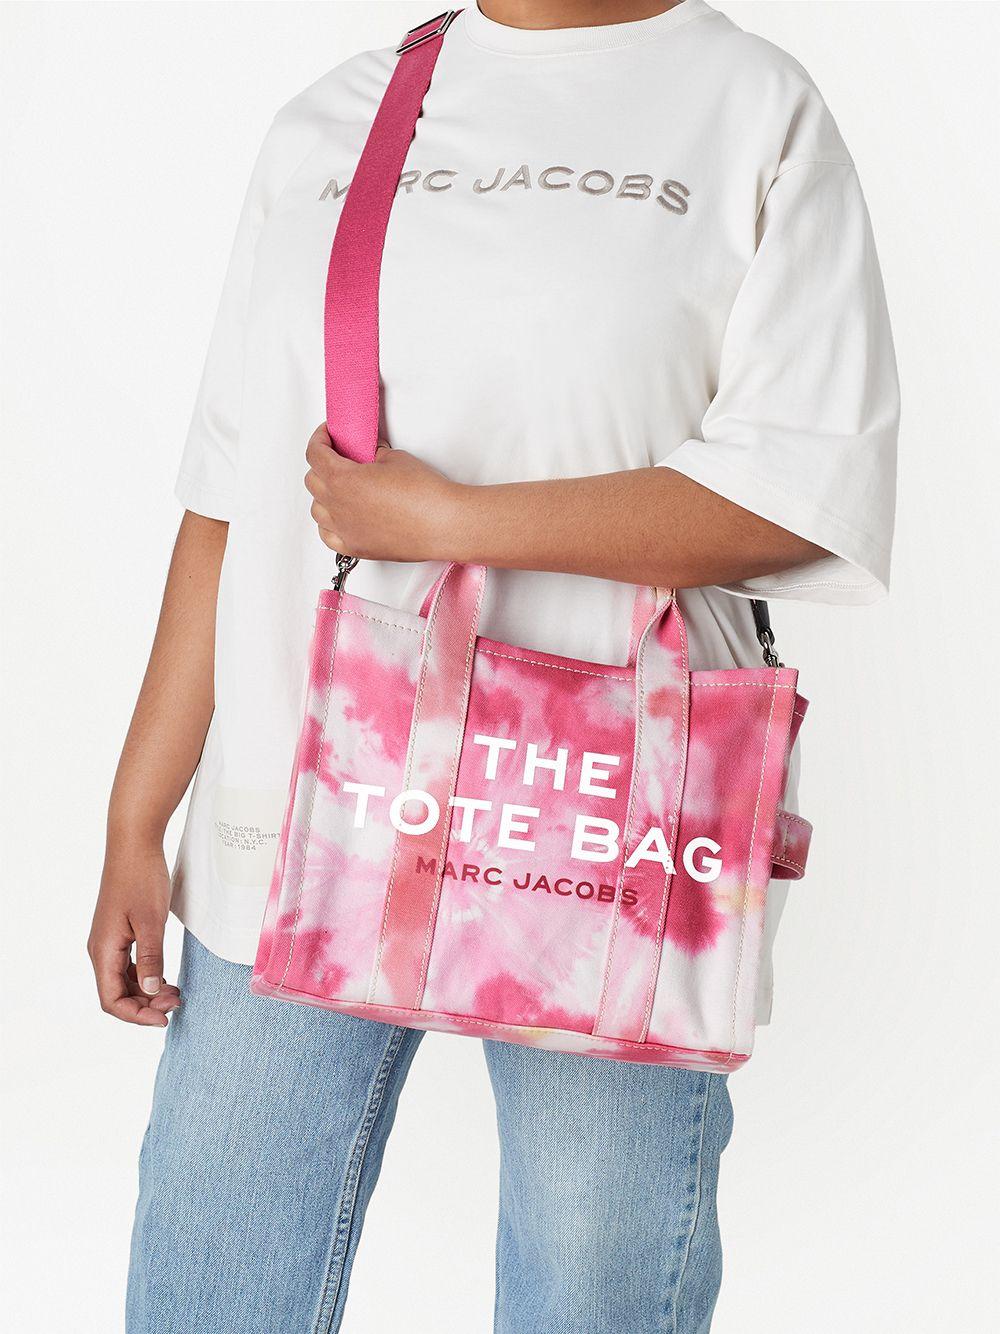 MARC JACOBS: The Tote Bag in tie dye canvas - Pink  Marc Jacobs mini bag  H013M02PF21 online at